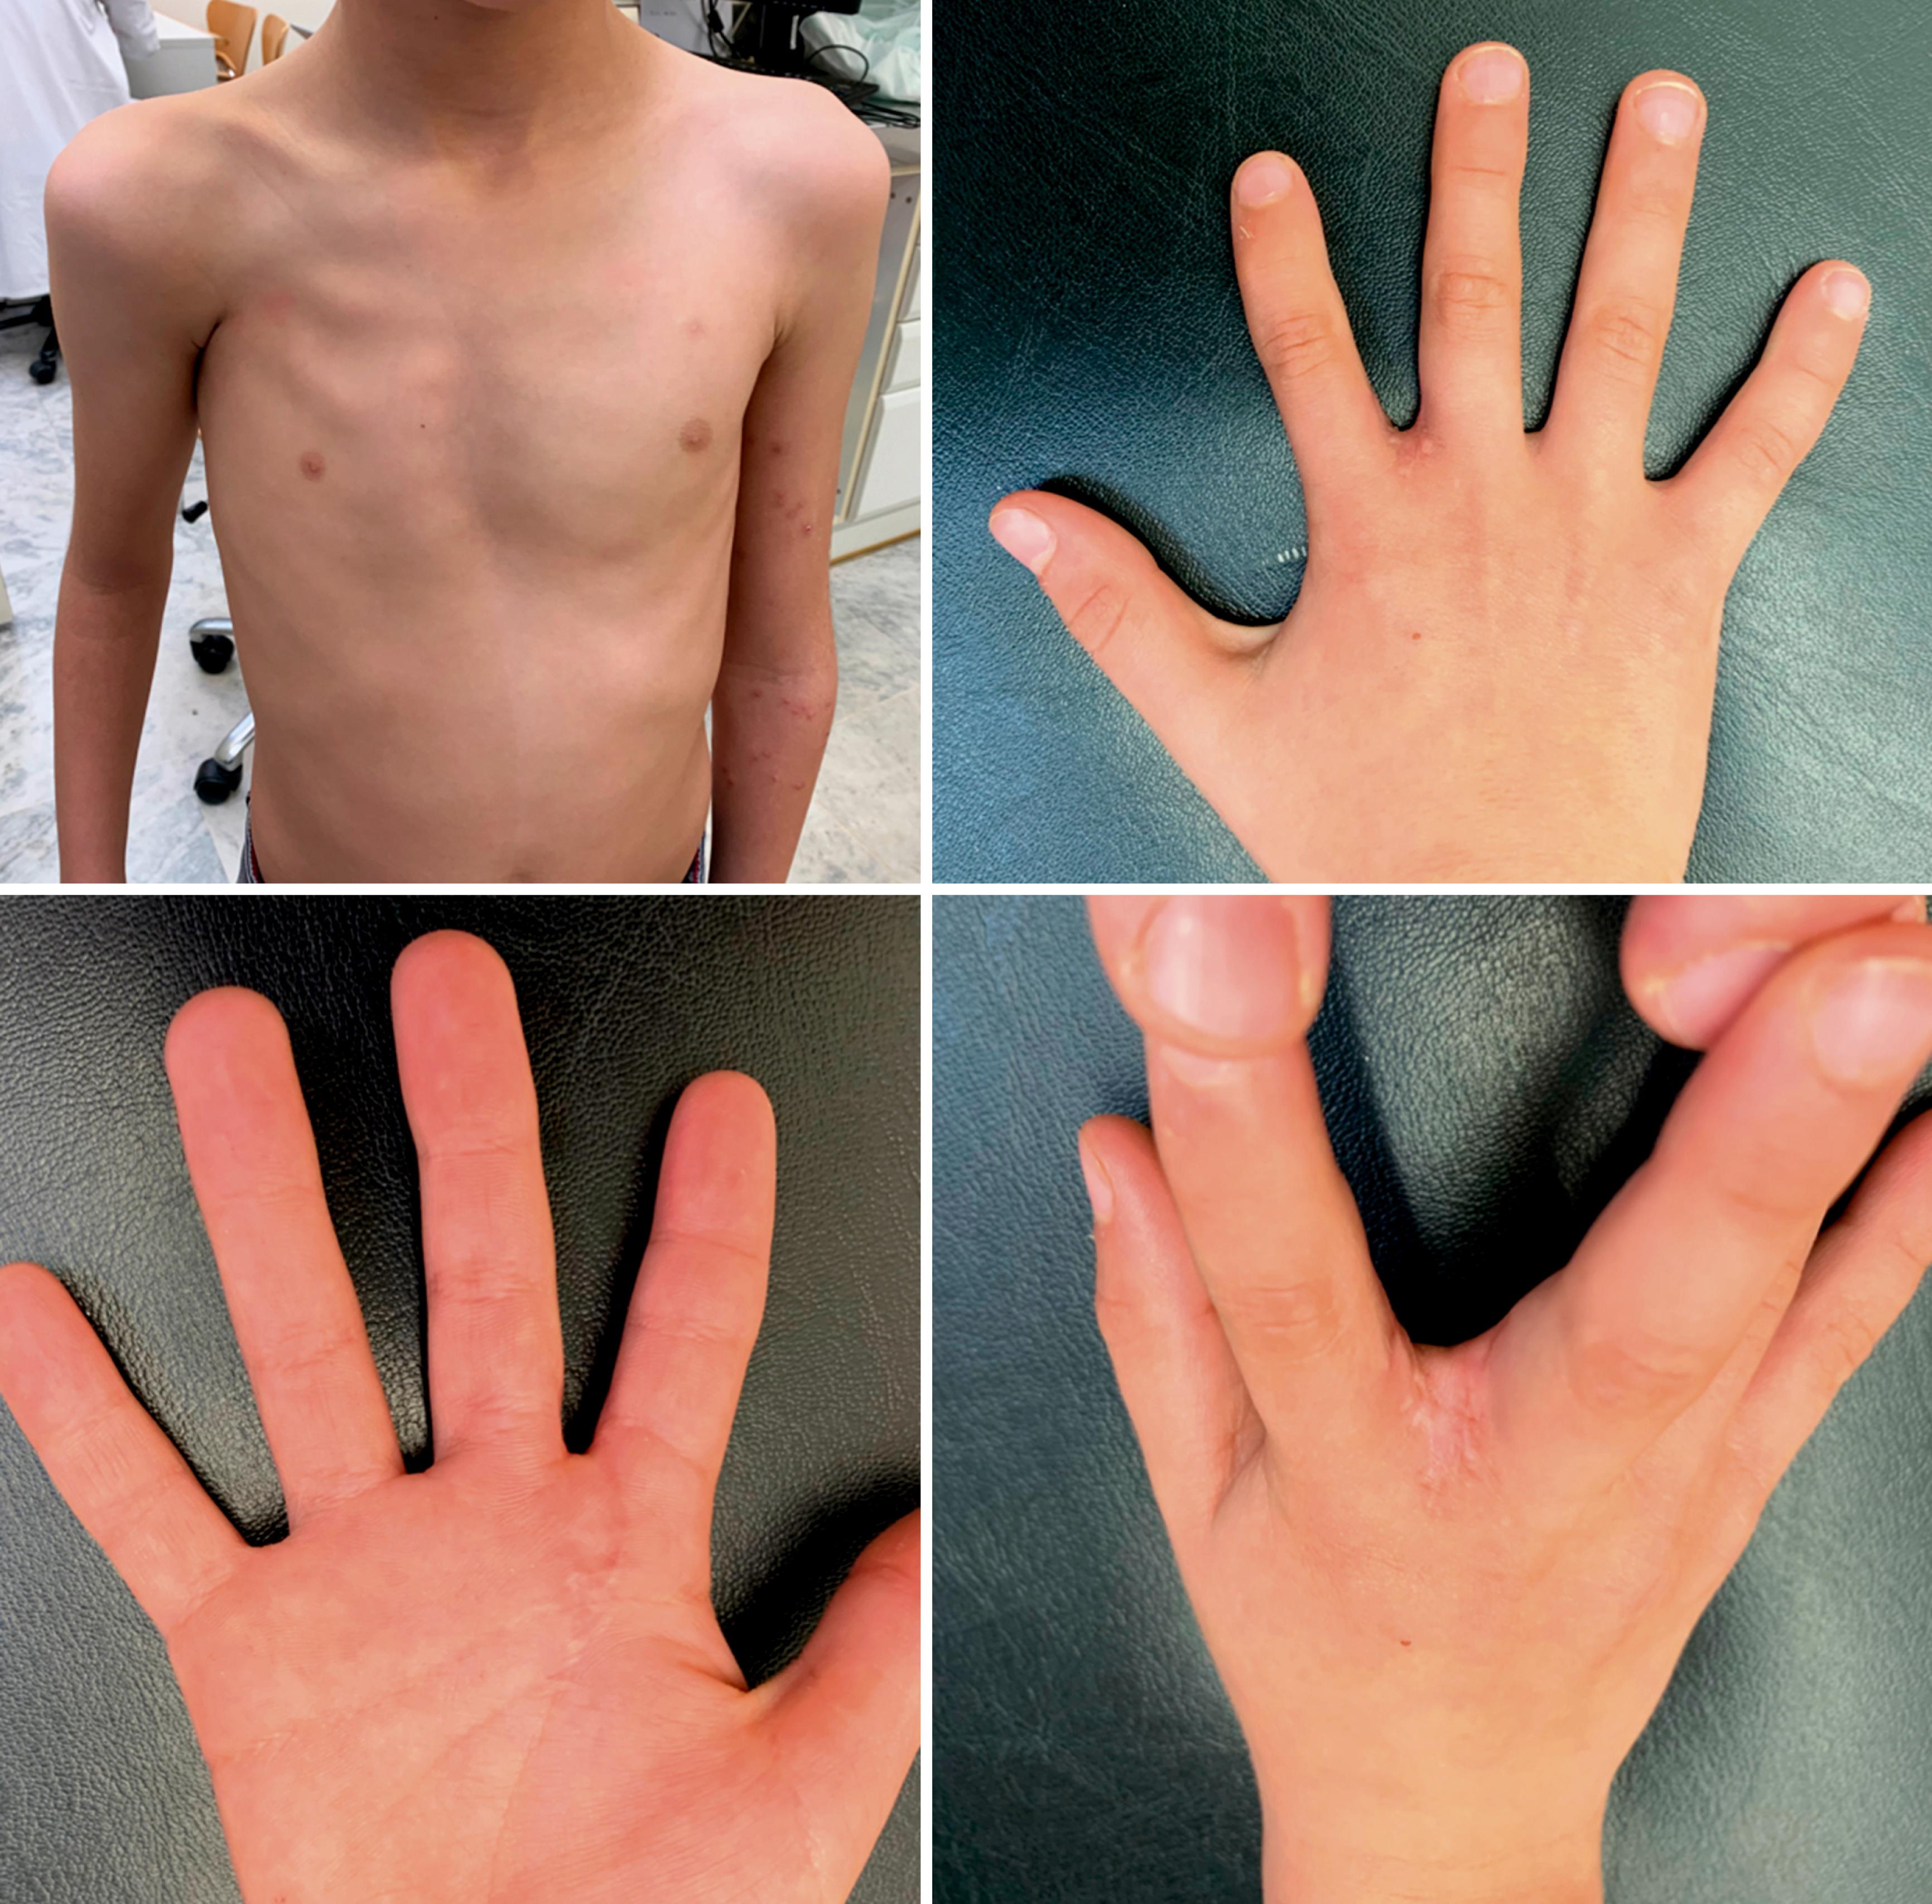 Fig. 36.29, Poland syndrome with a complete absence of the pectoralis major muscle. A partial second web syndactyly was released using a graftless volar intermetacarpal flap technique.